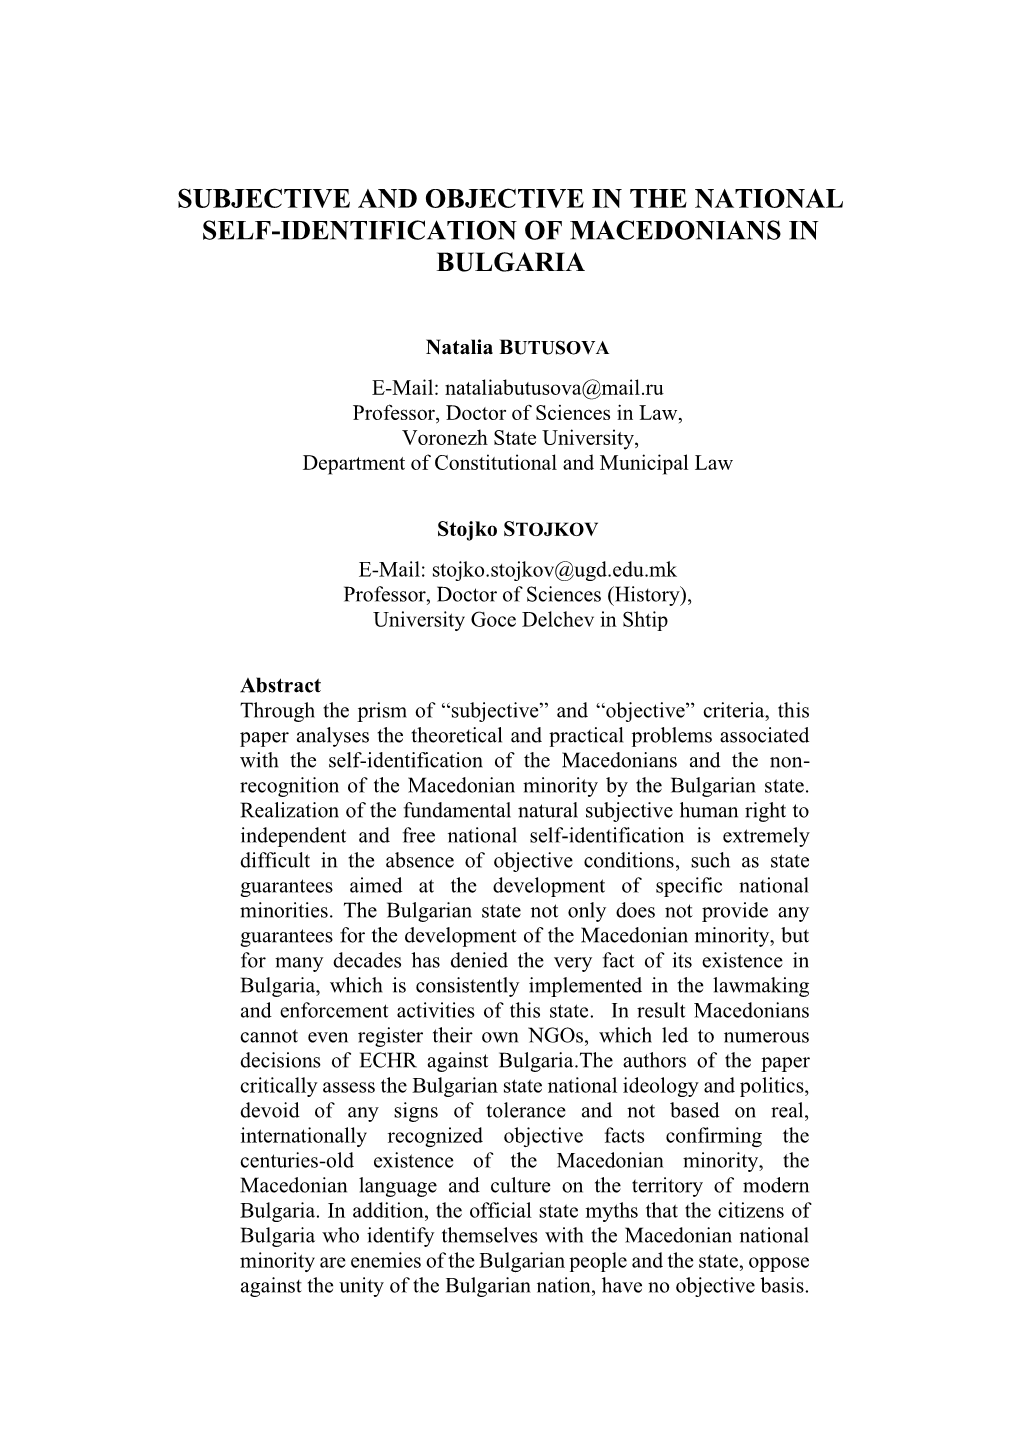 Subjective and Objective in the National Self-Identification of Macedonians in Bulgaria